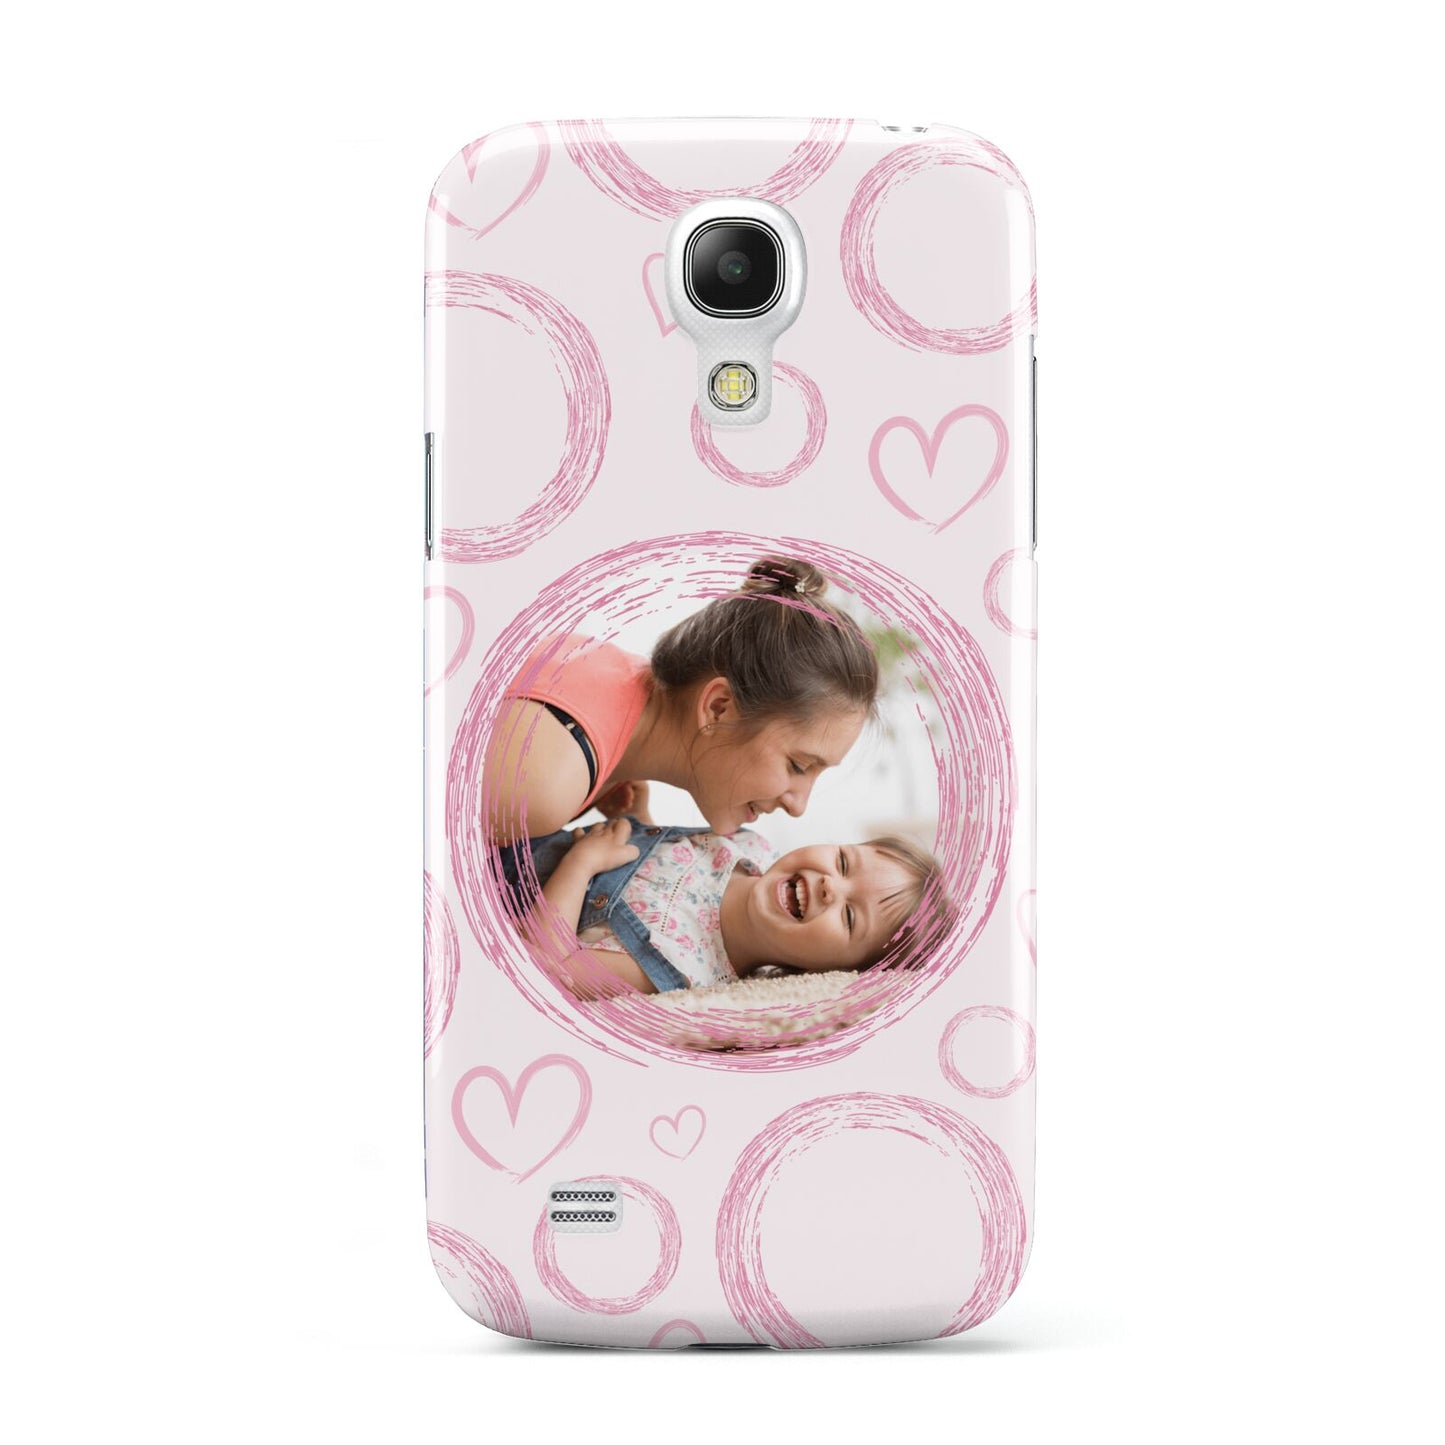 Pink Love Hearts Photo Personalised Samsung Galaxy S4 Mini Case